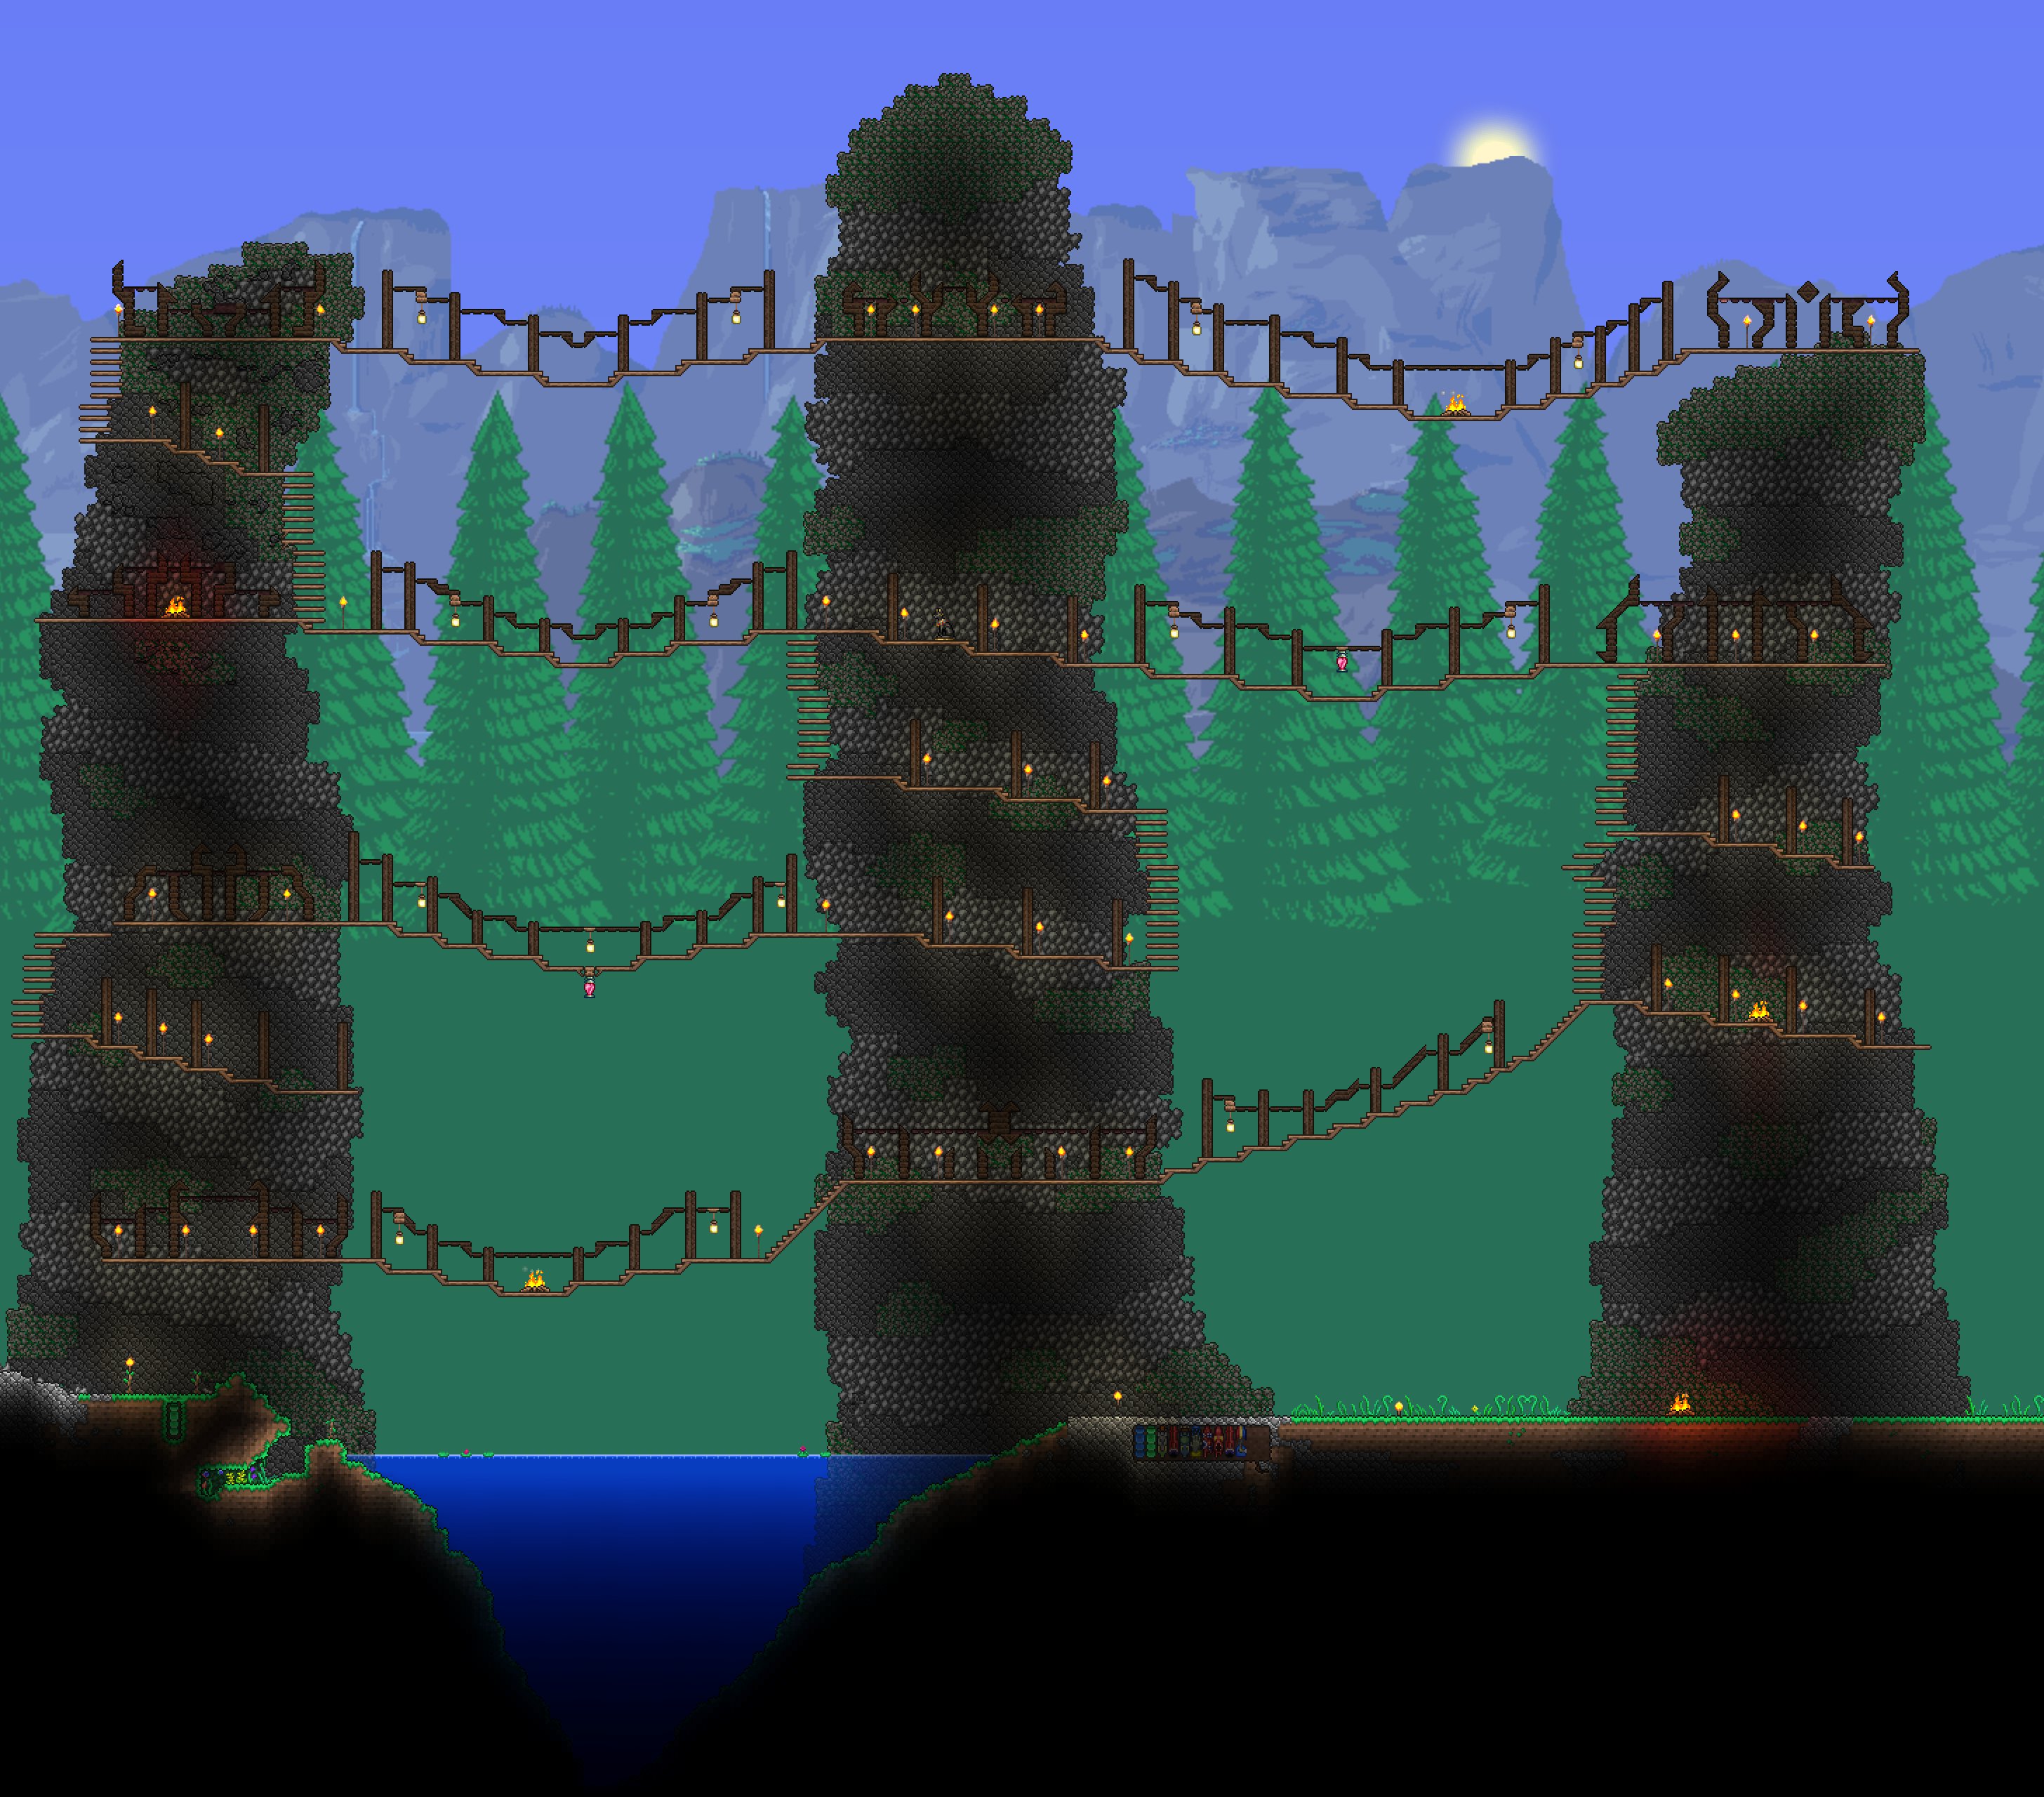 My current master mode arena : r/Terraria